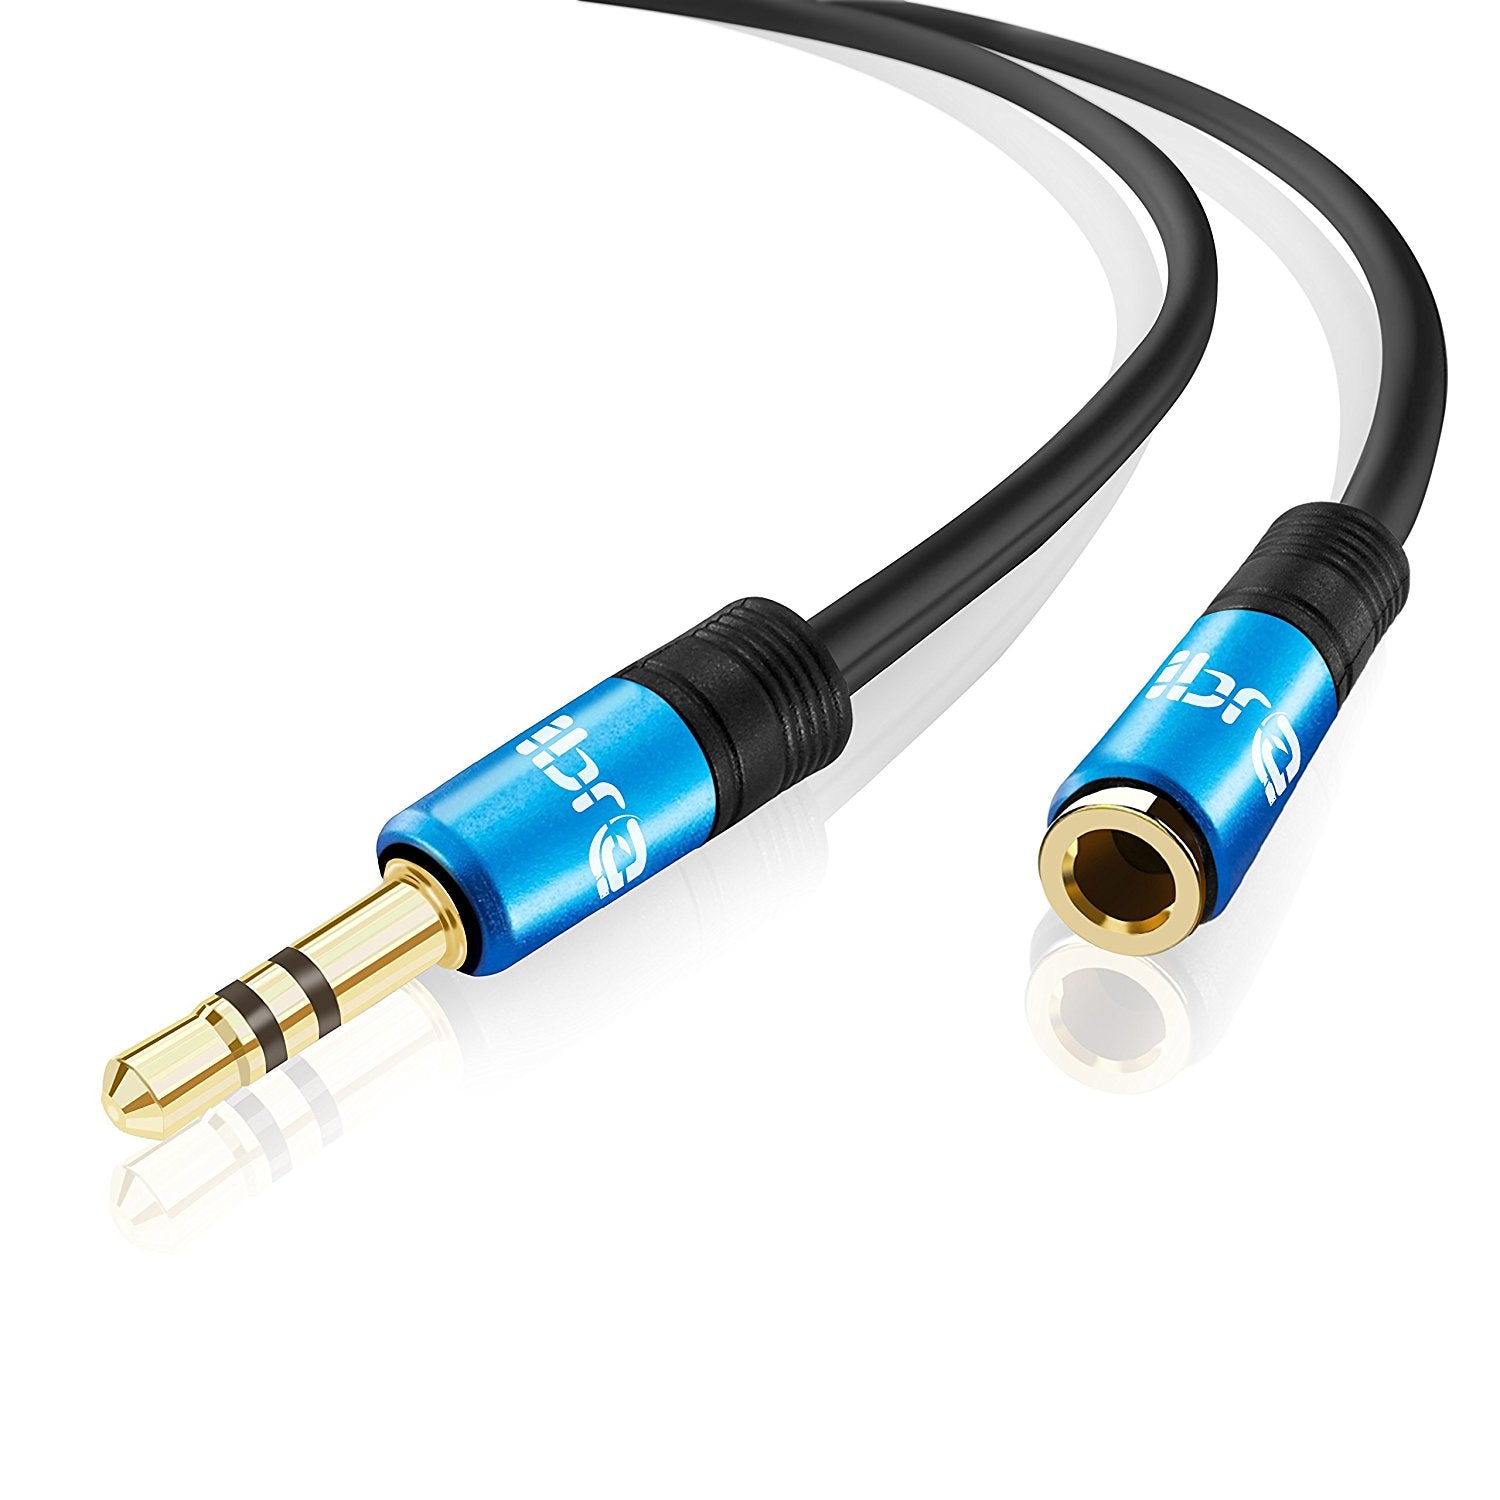 IBRA 5M Stereo Jack Extension Cable 3.5mm Male > 3.5mm Female - Blue